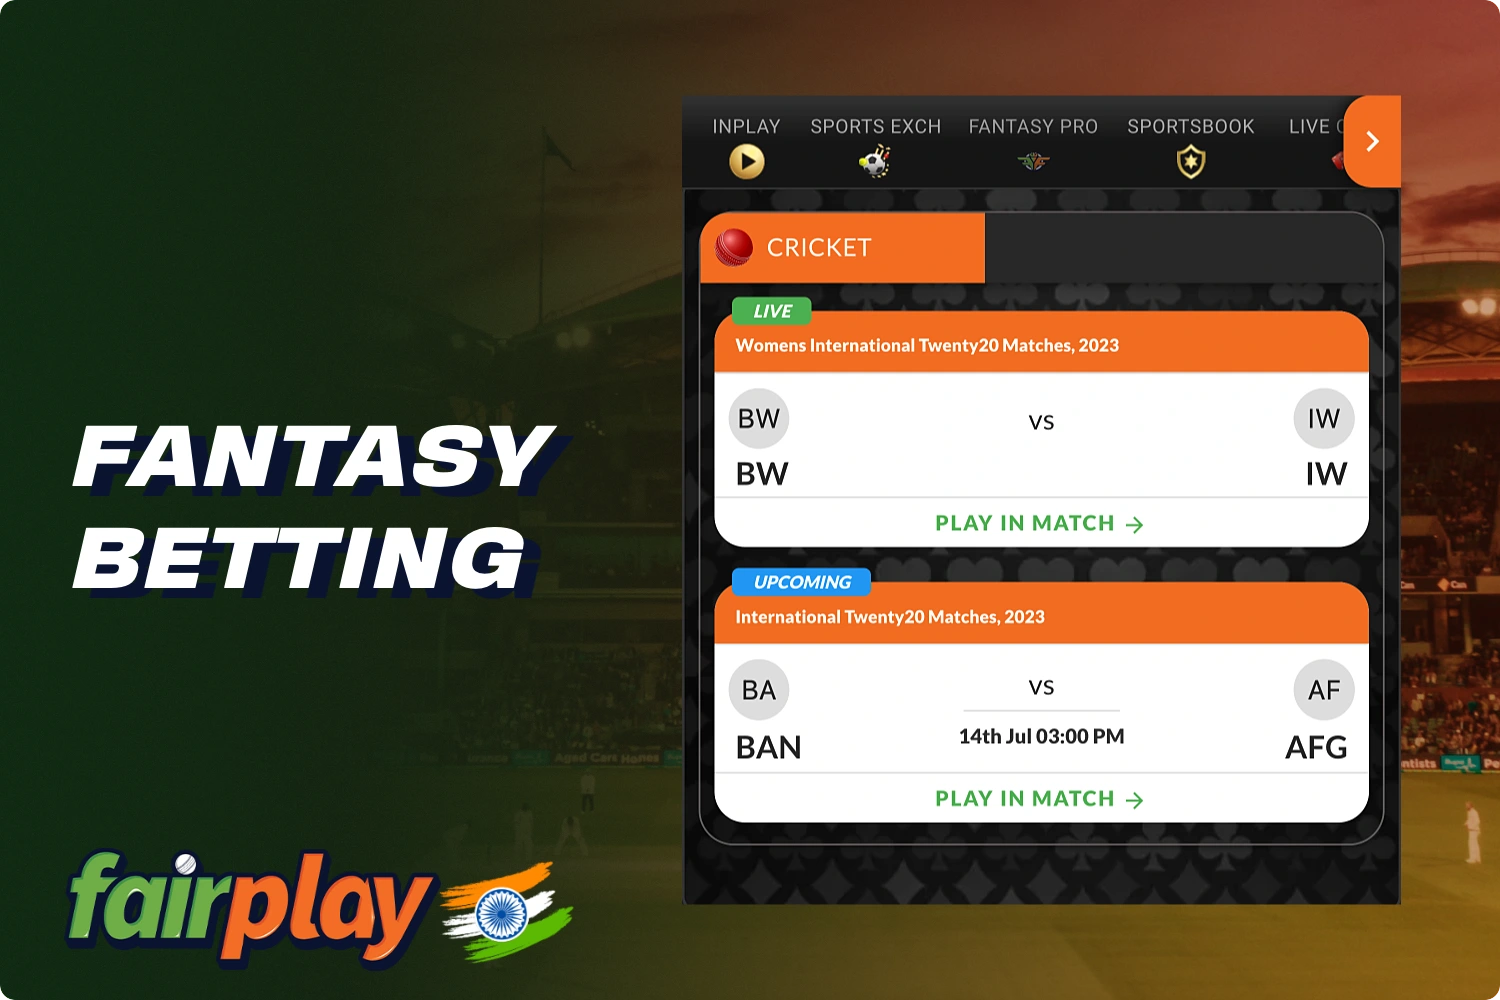 Fantasy betting at Fairplay has already gained popularity among Indian players, and every day more and more users are betting on fantasy sports and winning good money